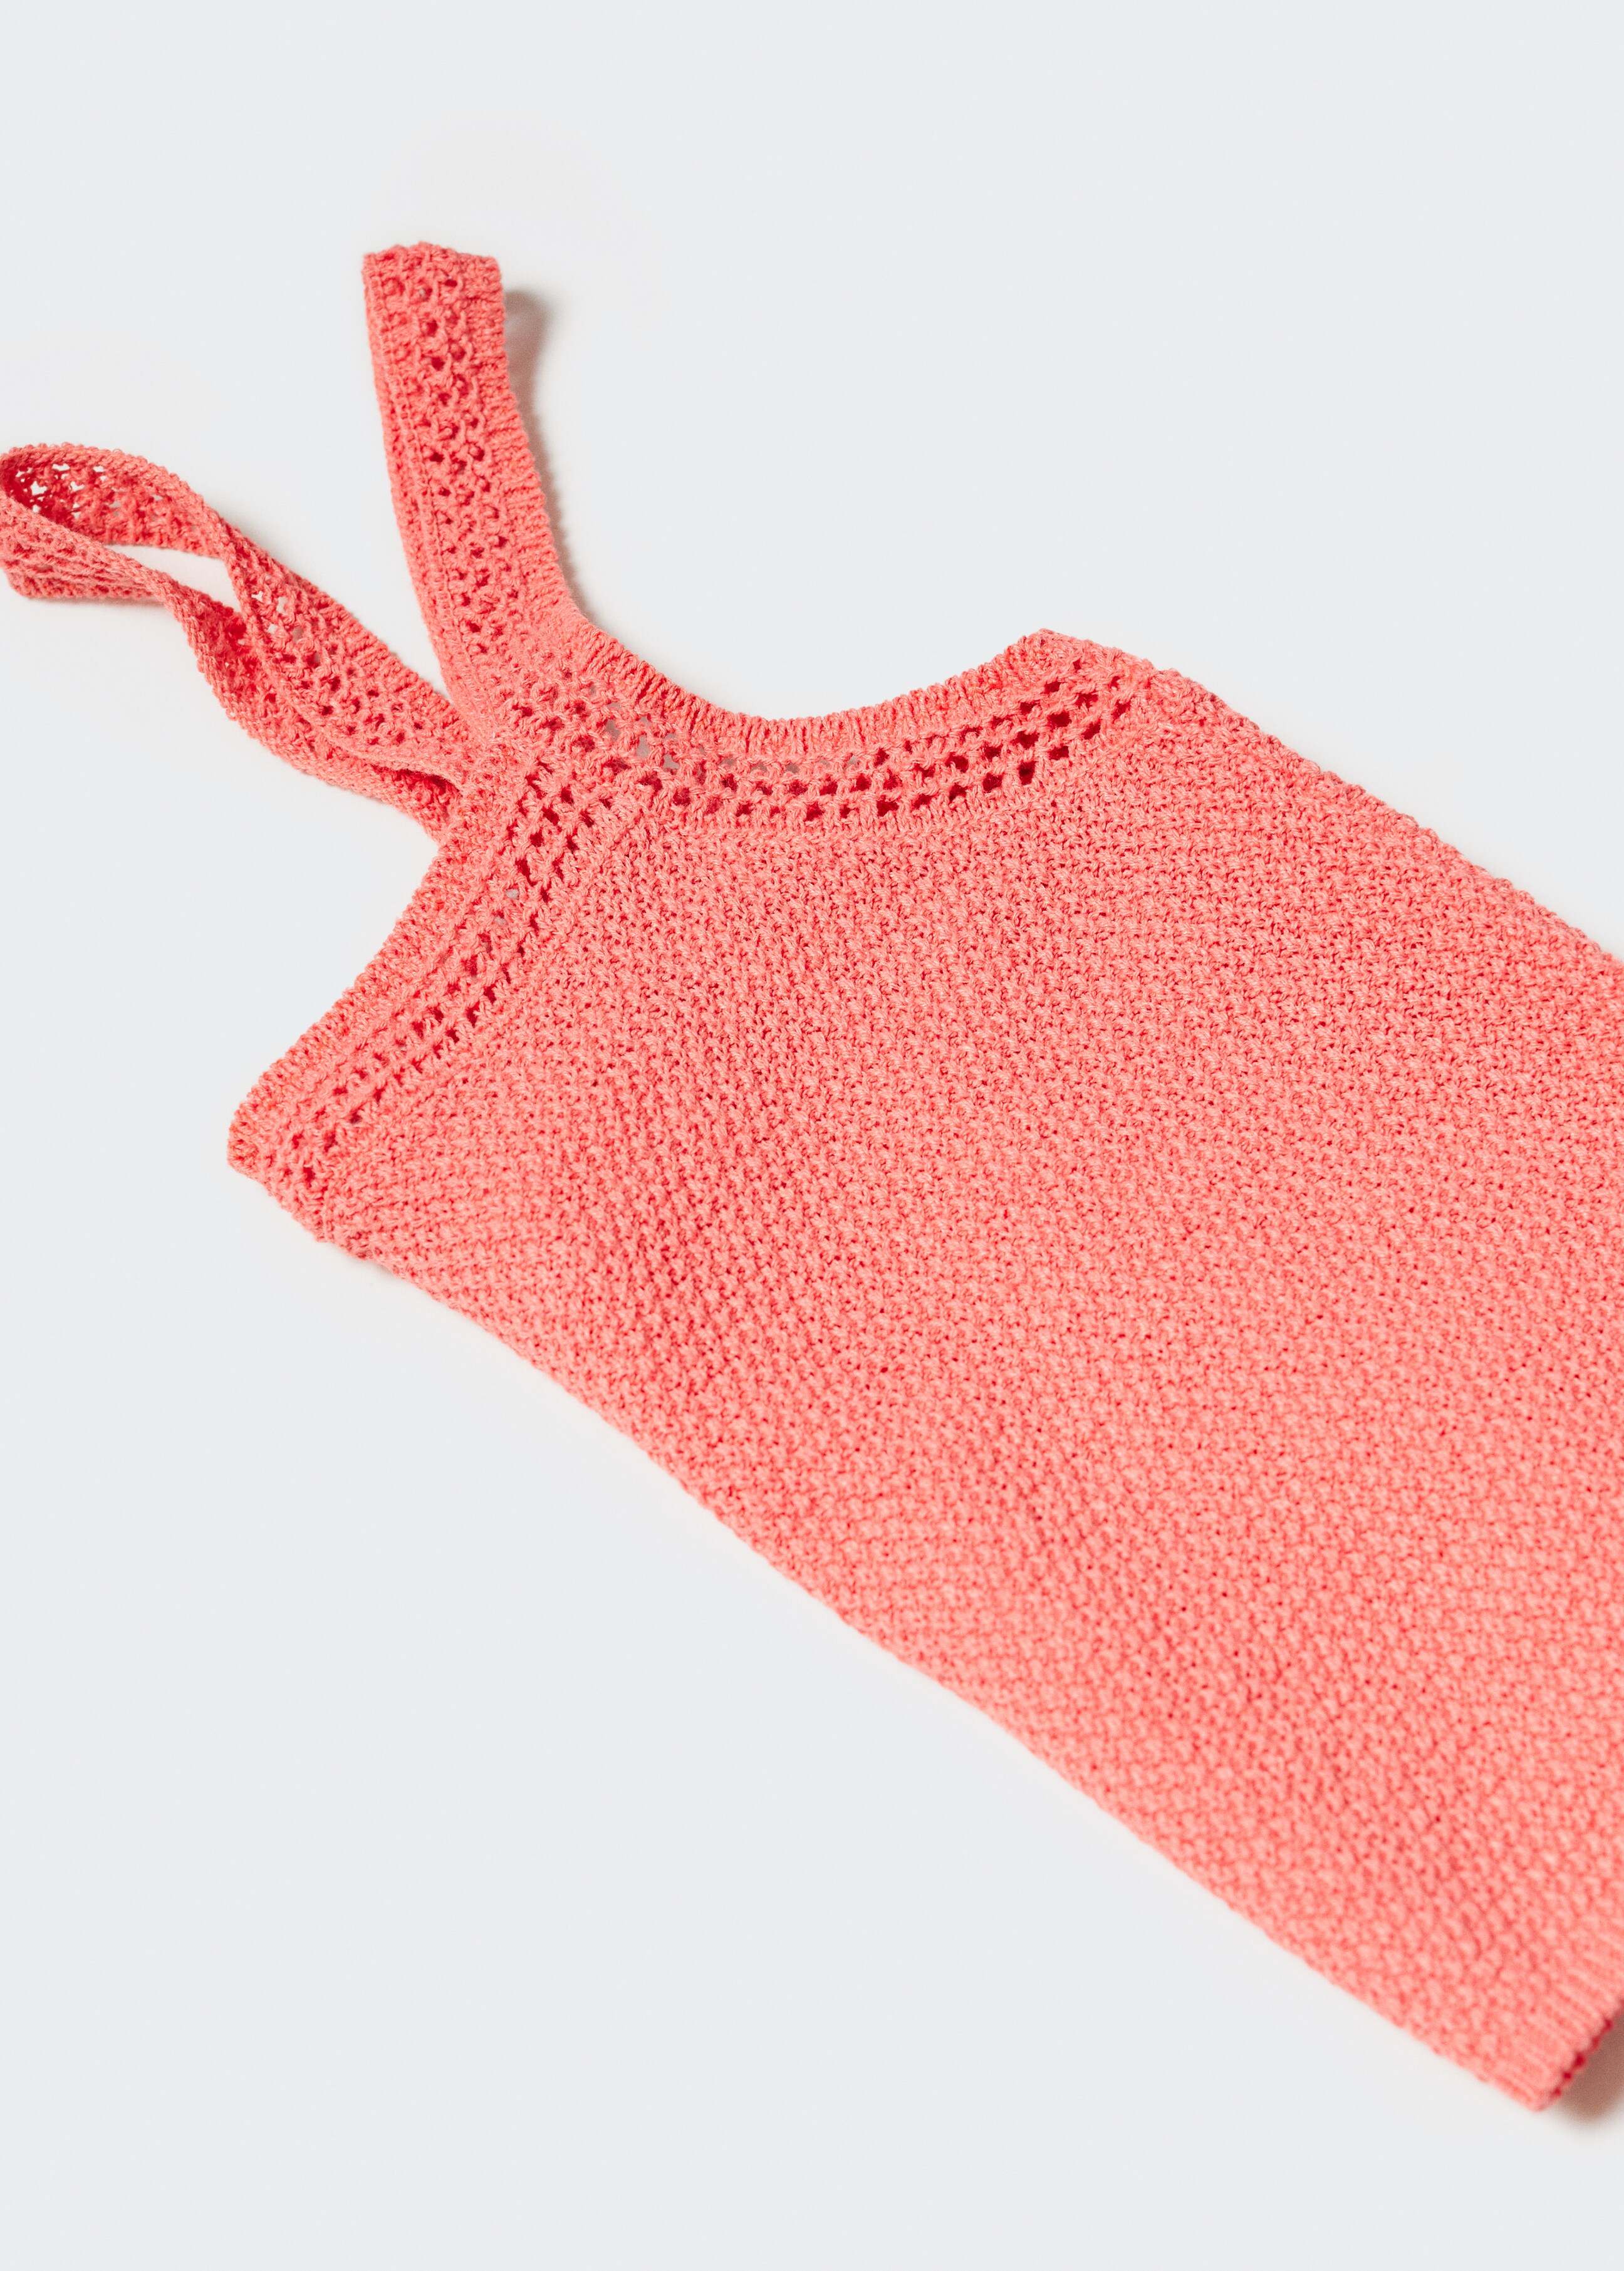 Crochet top - Details of the article 0